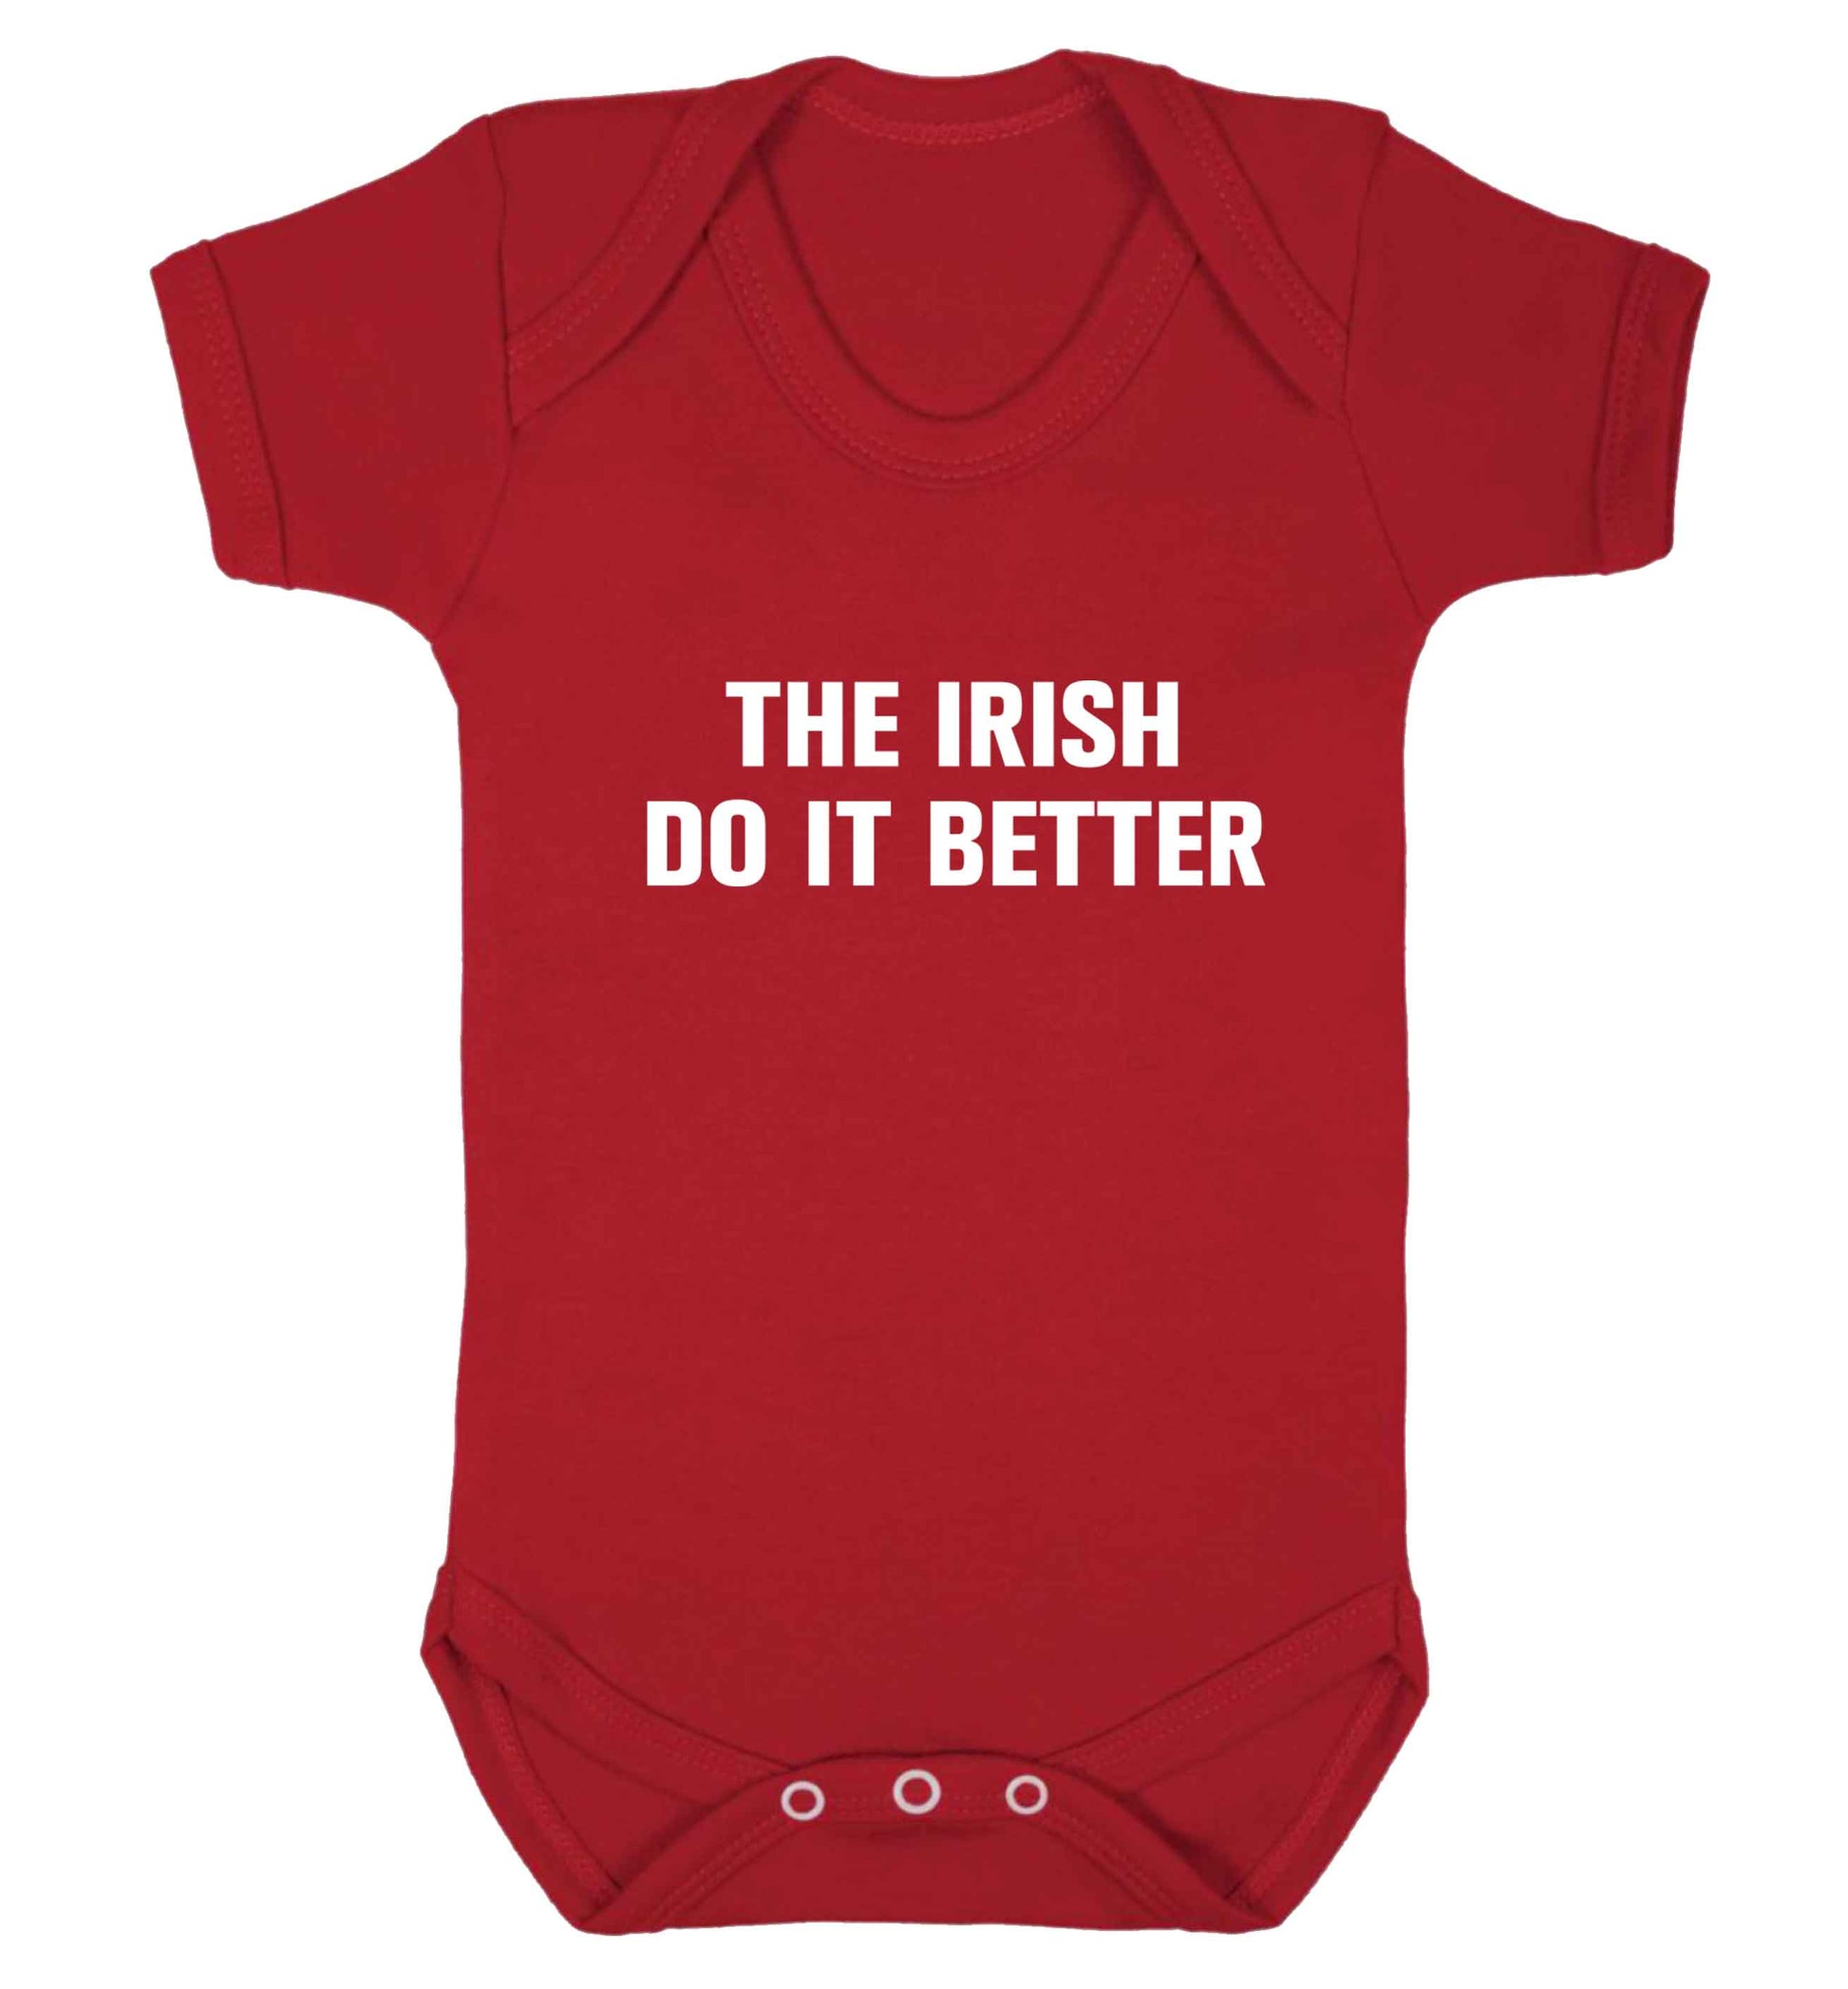 The Irish do it better baby vest red 18-24 months